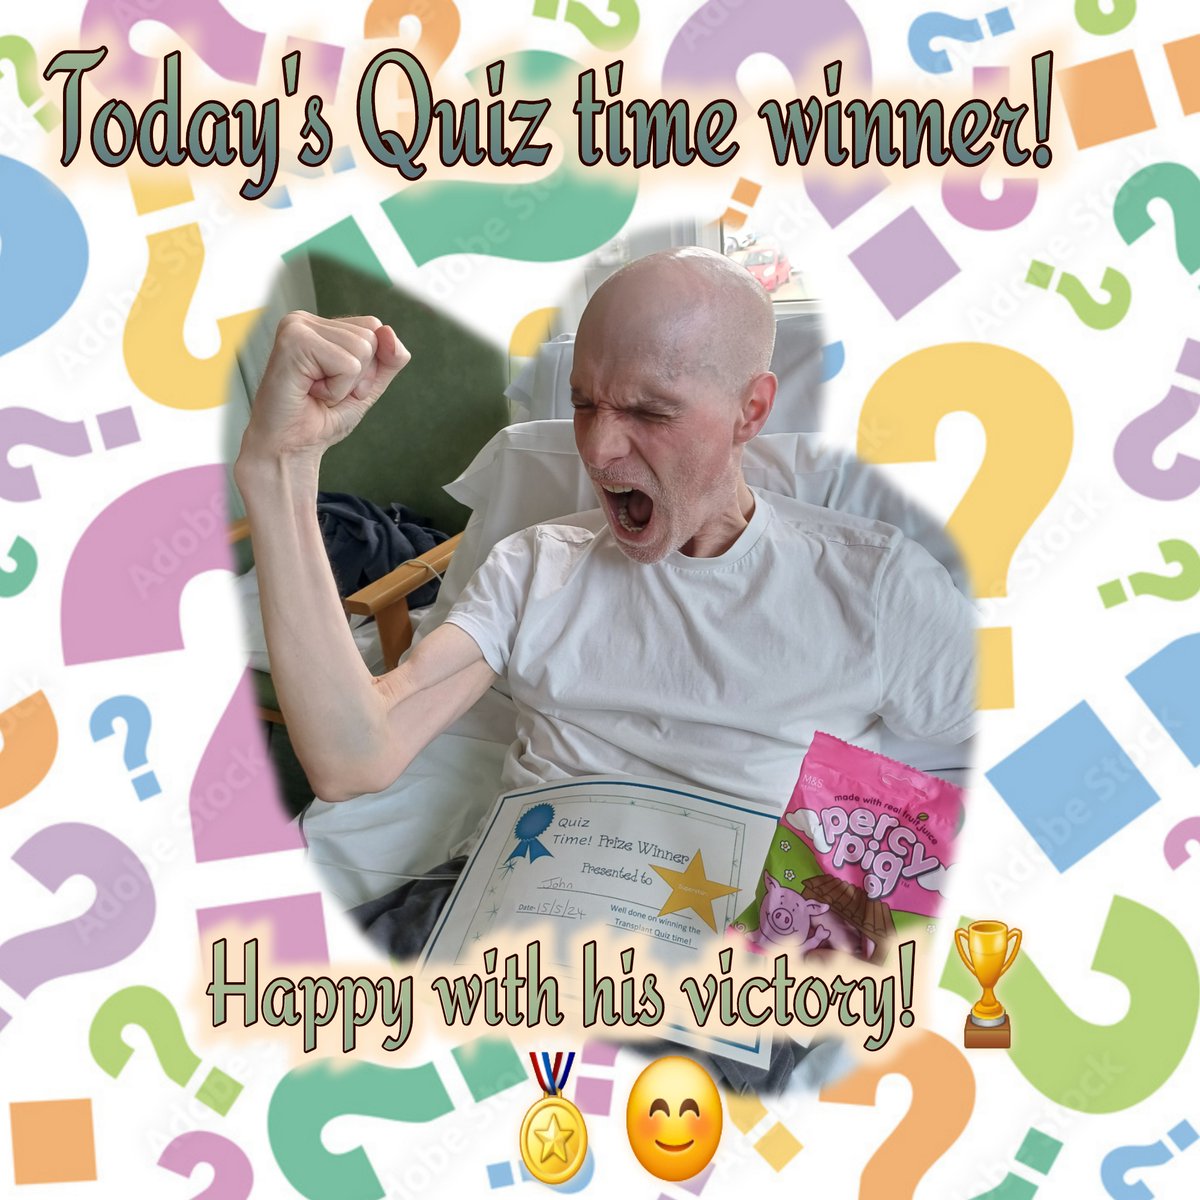 Well done to our quiz winner on Jim Quick today! John scored a massive 39 out of 45! He was extremely excited about his percy pigs prize! 😅🏆  
#winner #quizzing #brainhealth @MFTnhs @MFT_PatientExp @Michaela0895 @vikki_warman @TntTracy73 @parkerkarenj @NHSEngland @NHSuk